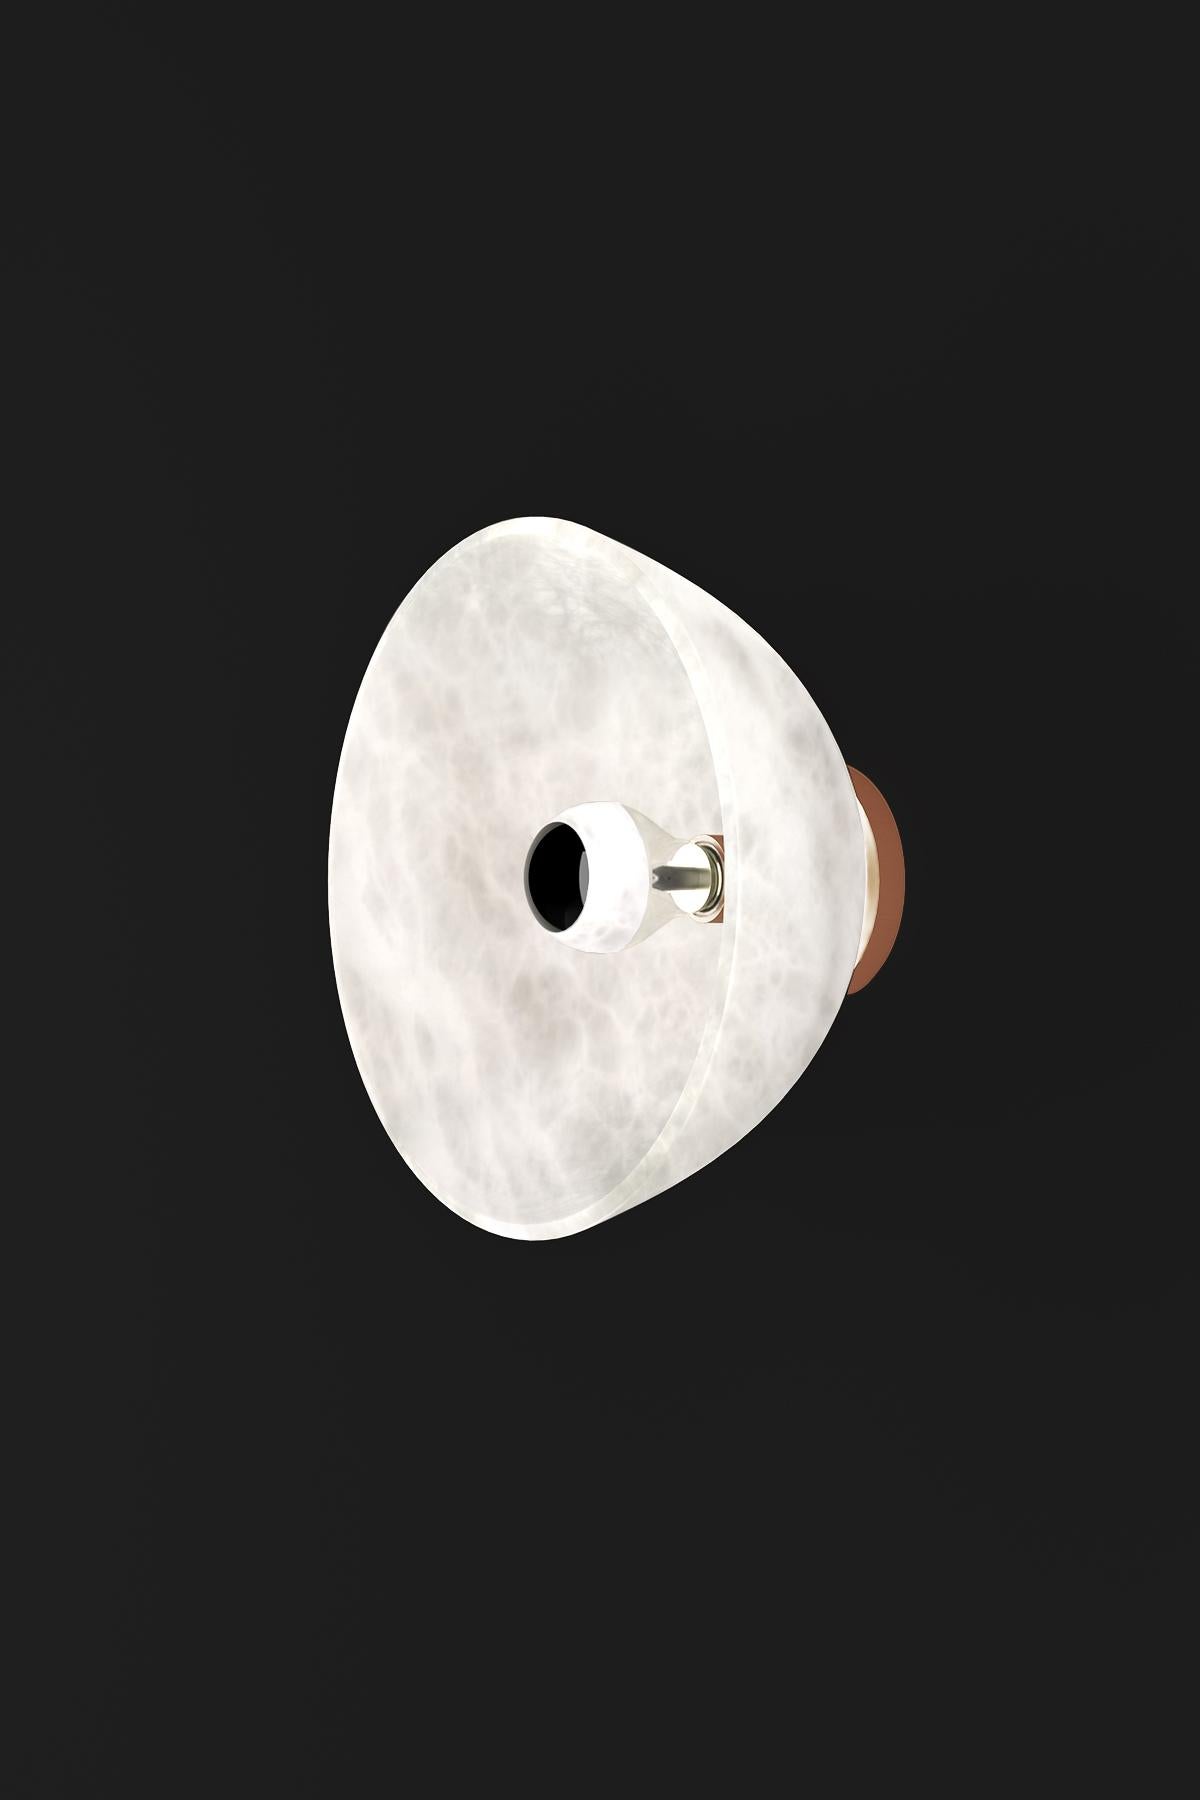 Apollo Copper Wall Lamp by Alabastro Italiano
Dimensions: Ø 30 x W 17,5 cm.
Materials: White alabaster and copper.

Available in different finishes: Shiny Silver, Bronze, Brushed Brass, Ruggine of Florence, Brushed Burnished, Shiny Gold, Brushed